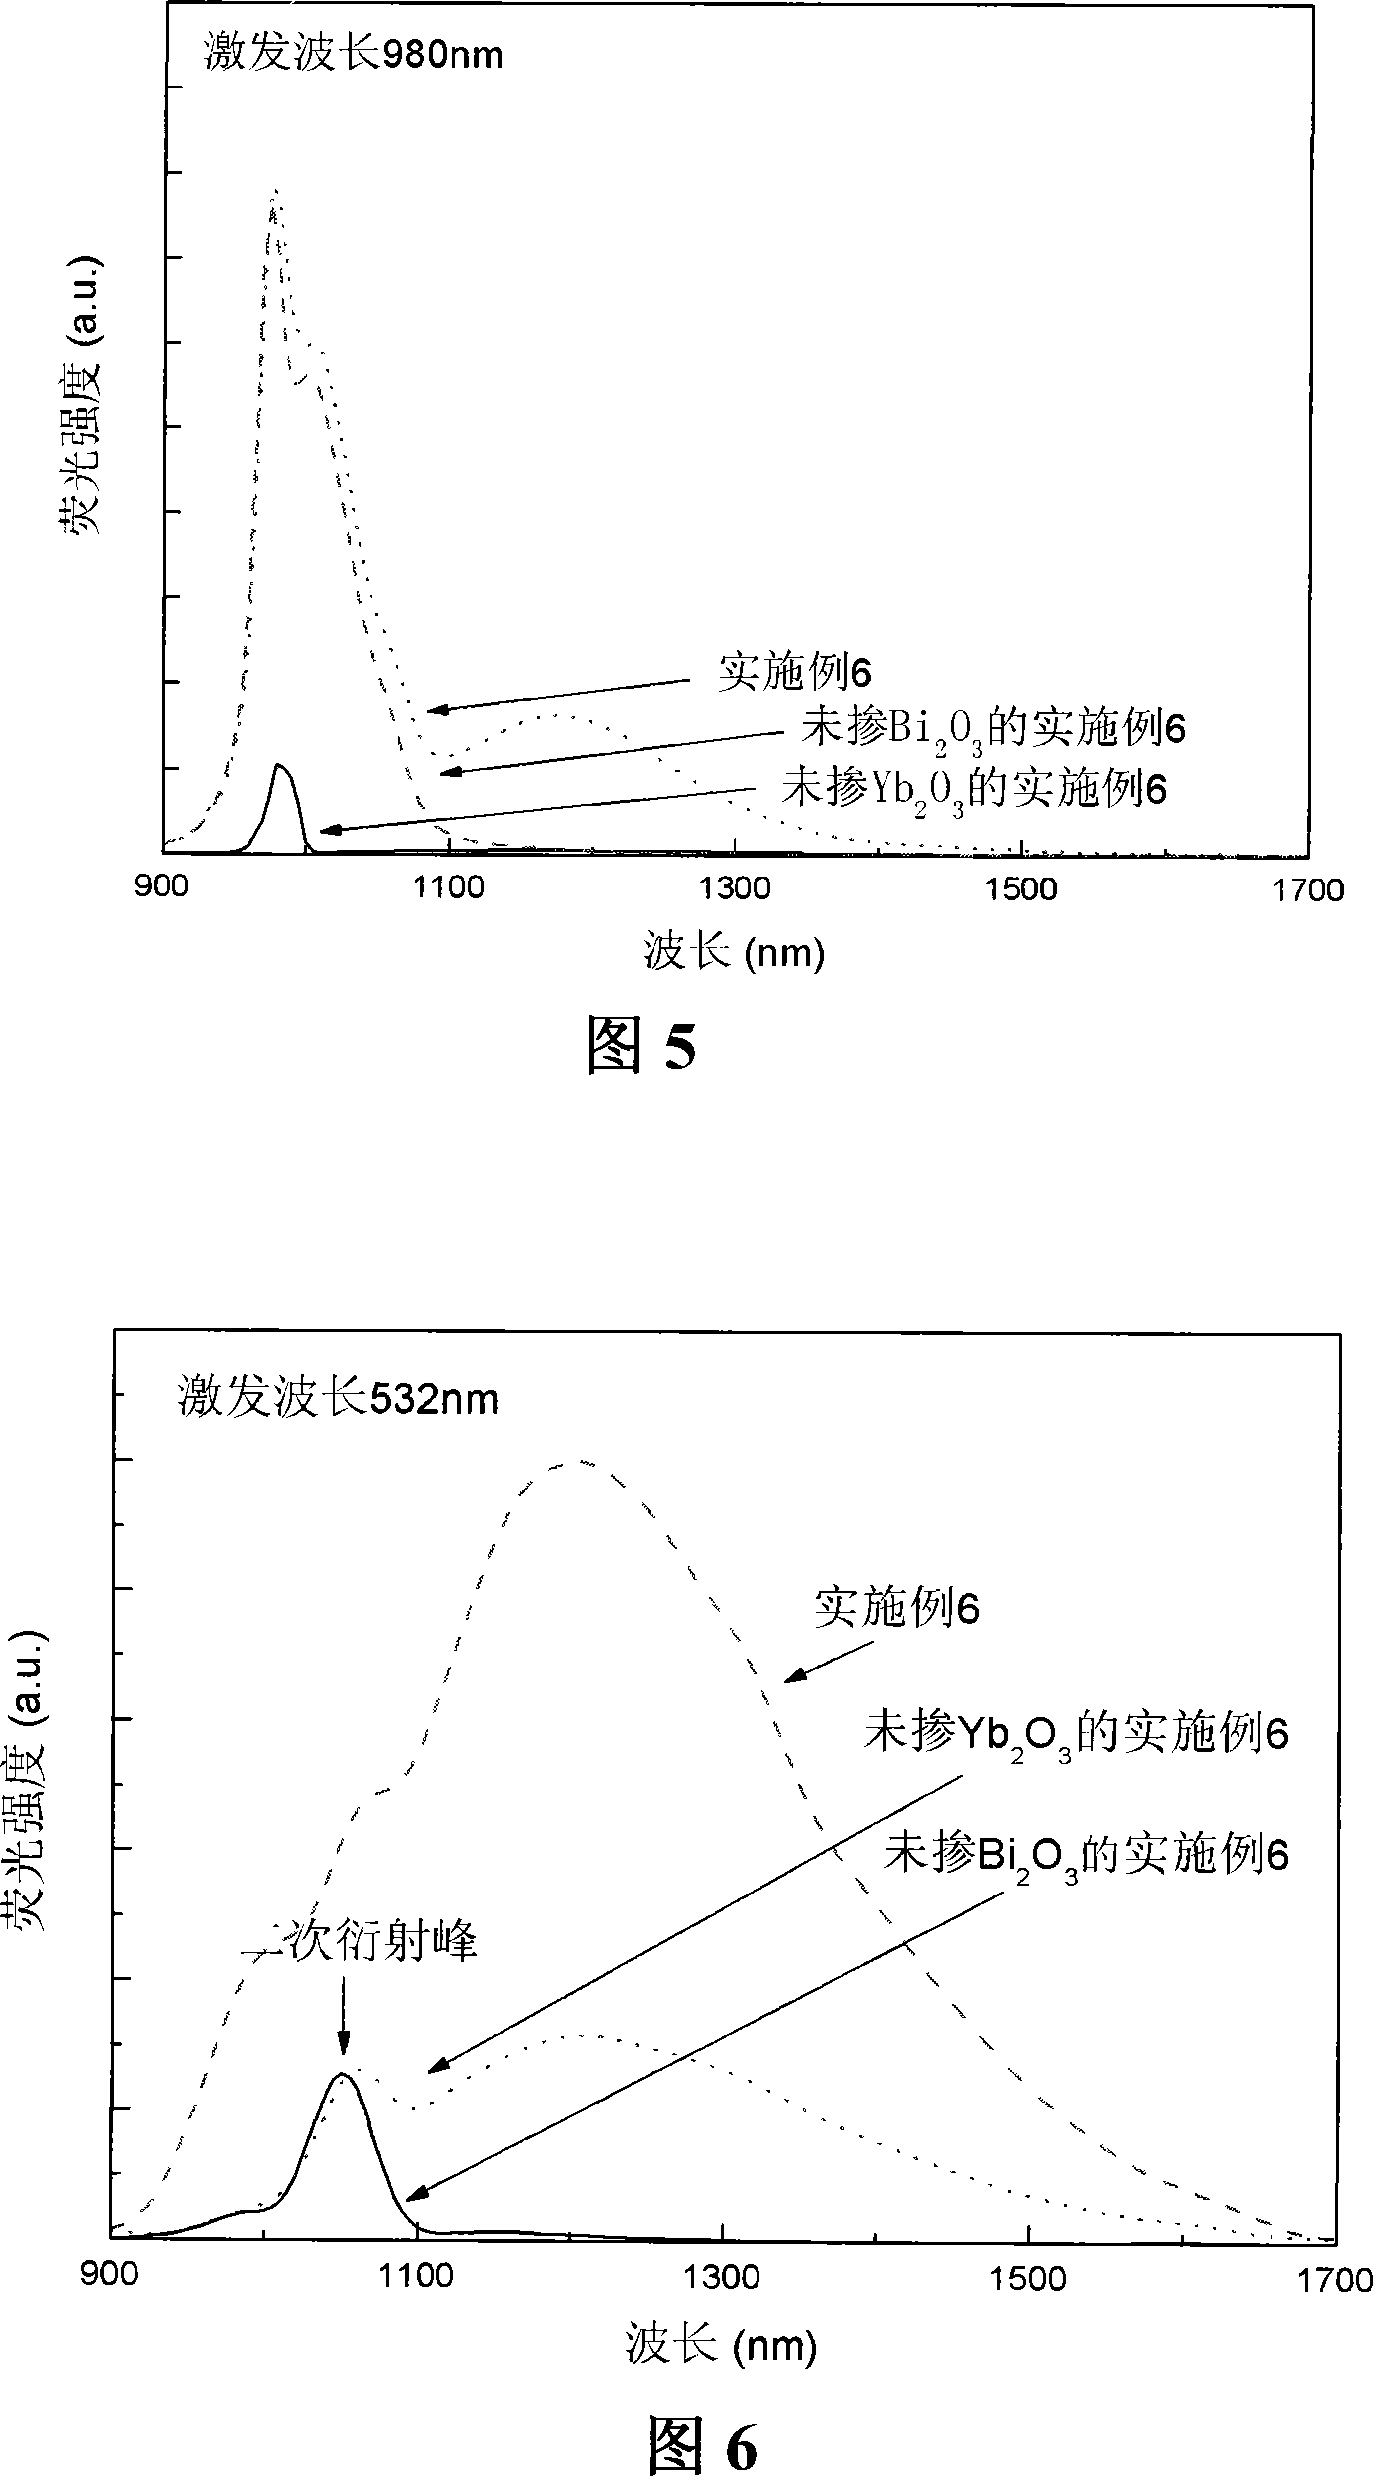 Ytterbium-bismuth co-doped phosphonate based optical glass and method for making same